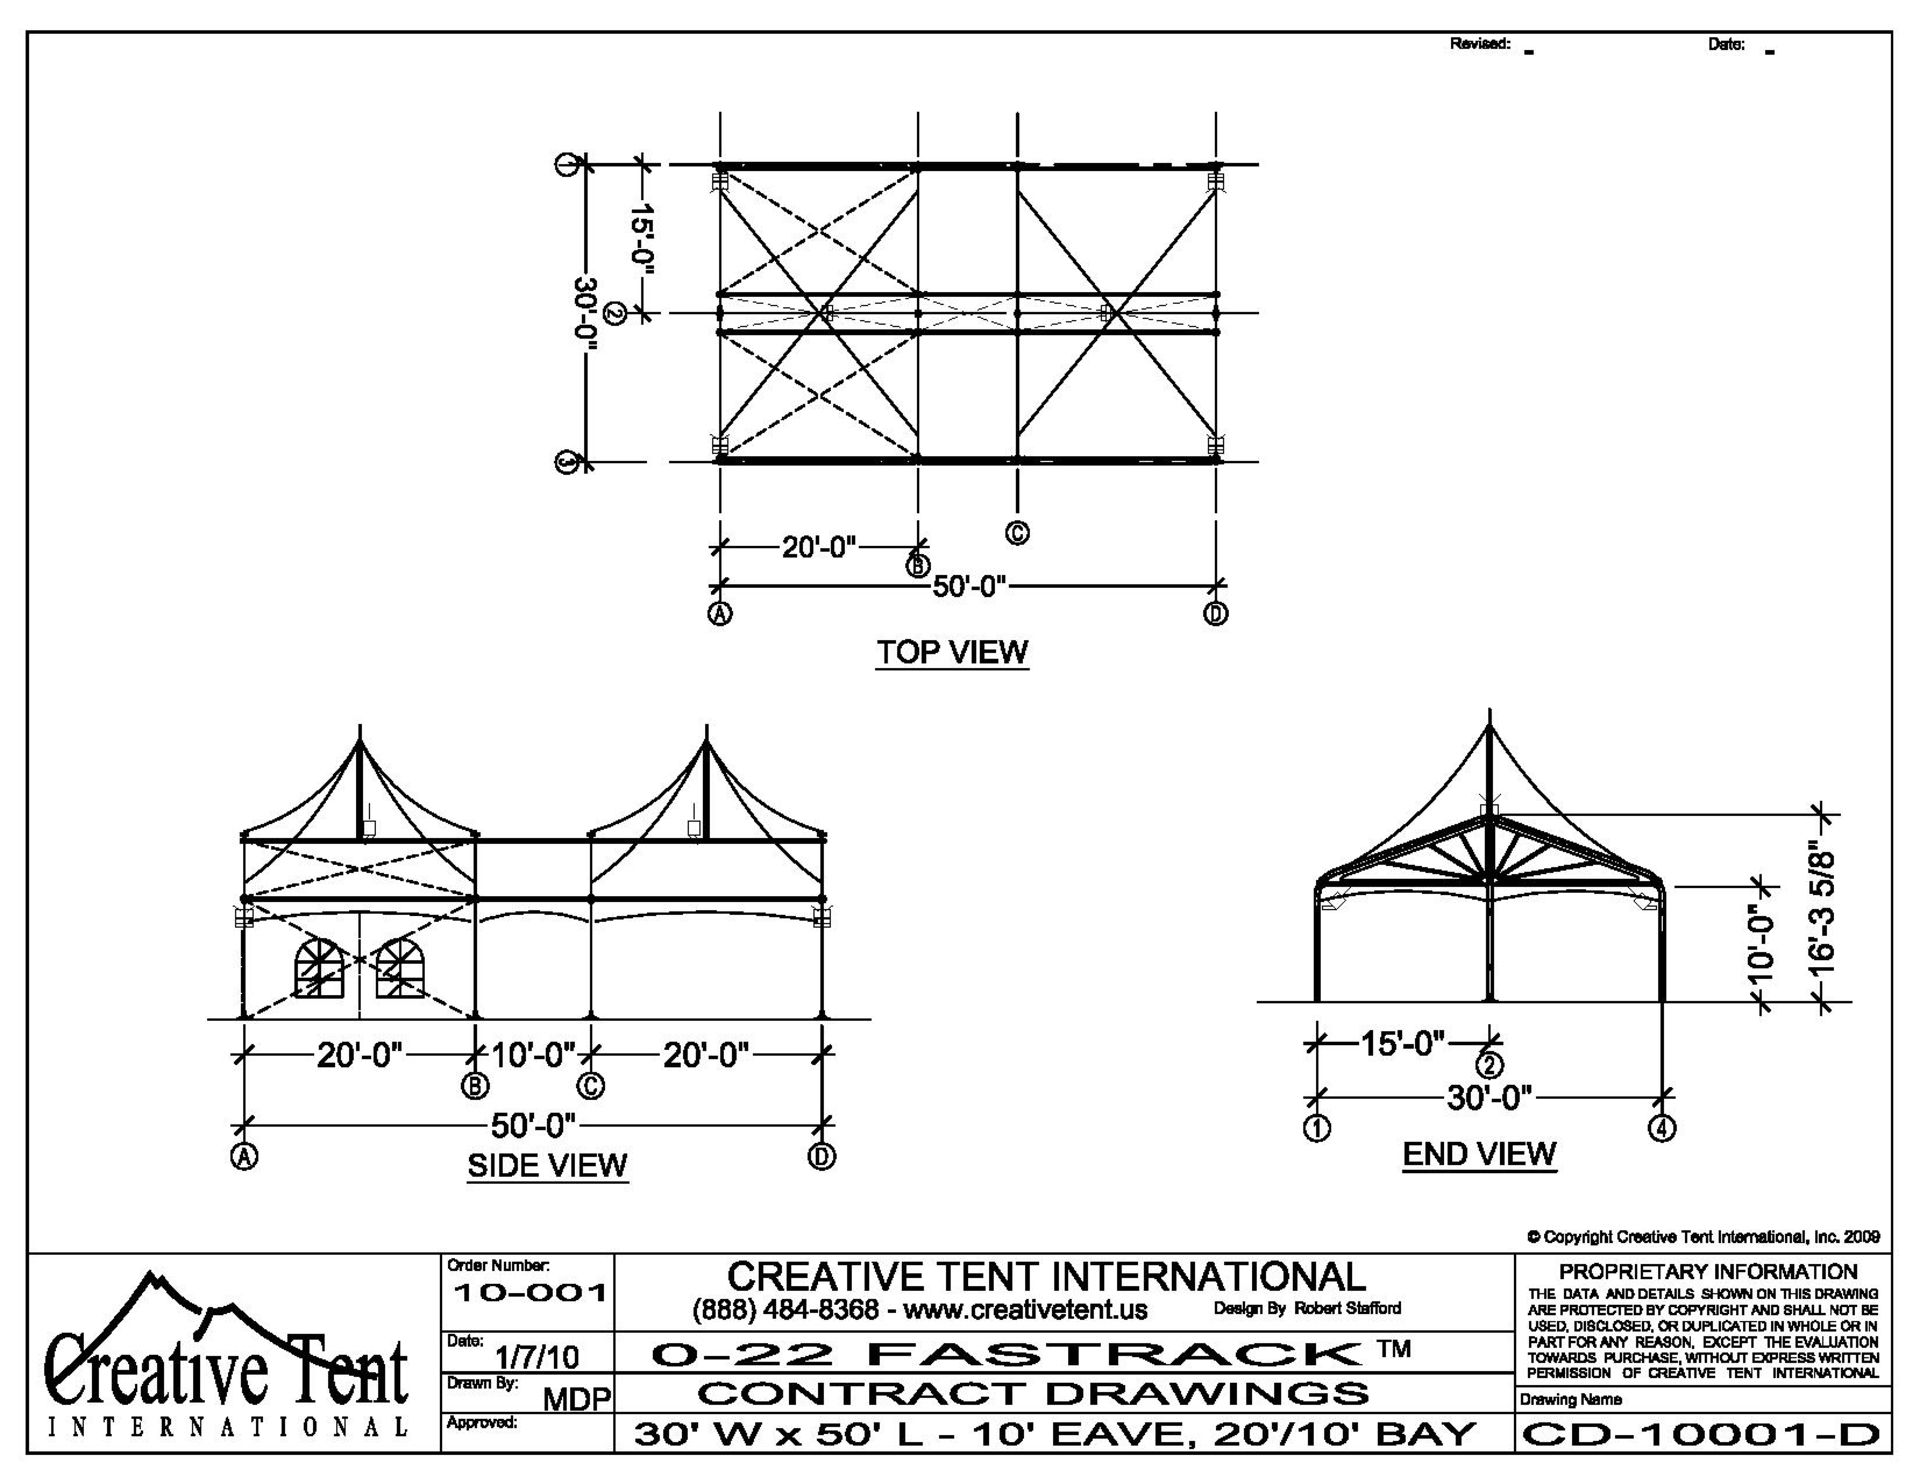 CREATIVE TENT 30' X 50' - 022 FAST TRACK SYSTEM WITH SHASTA PEAK KIT ADDON AND FULL SIDING (Like New - Image 9 of 9